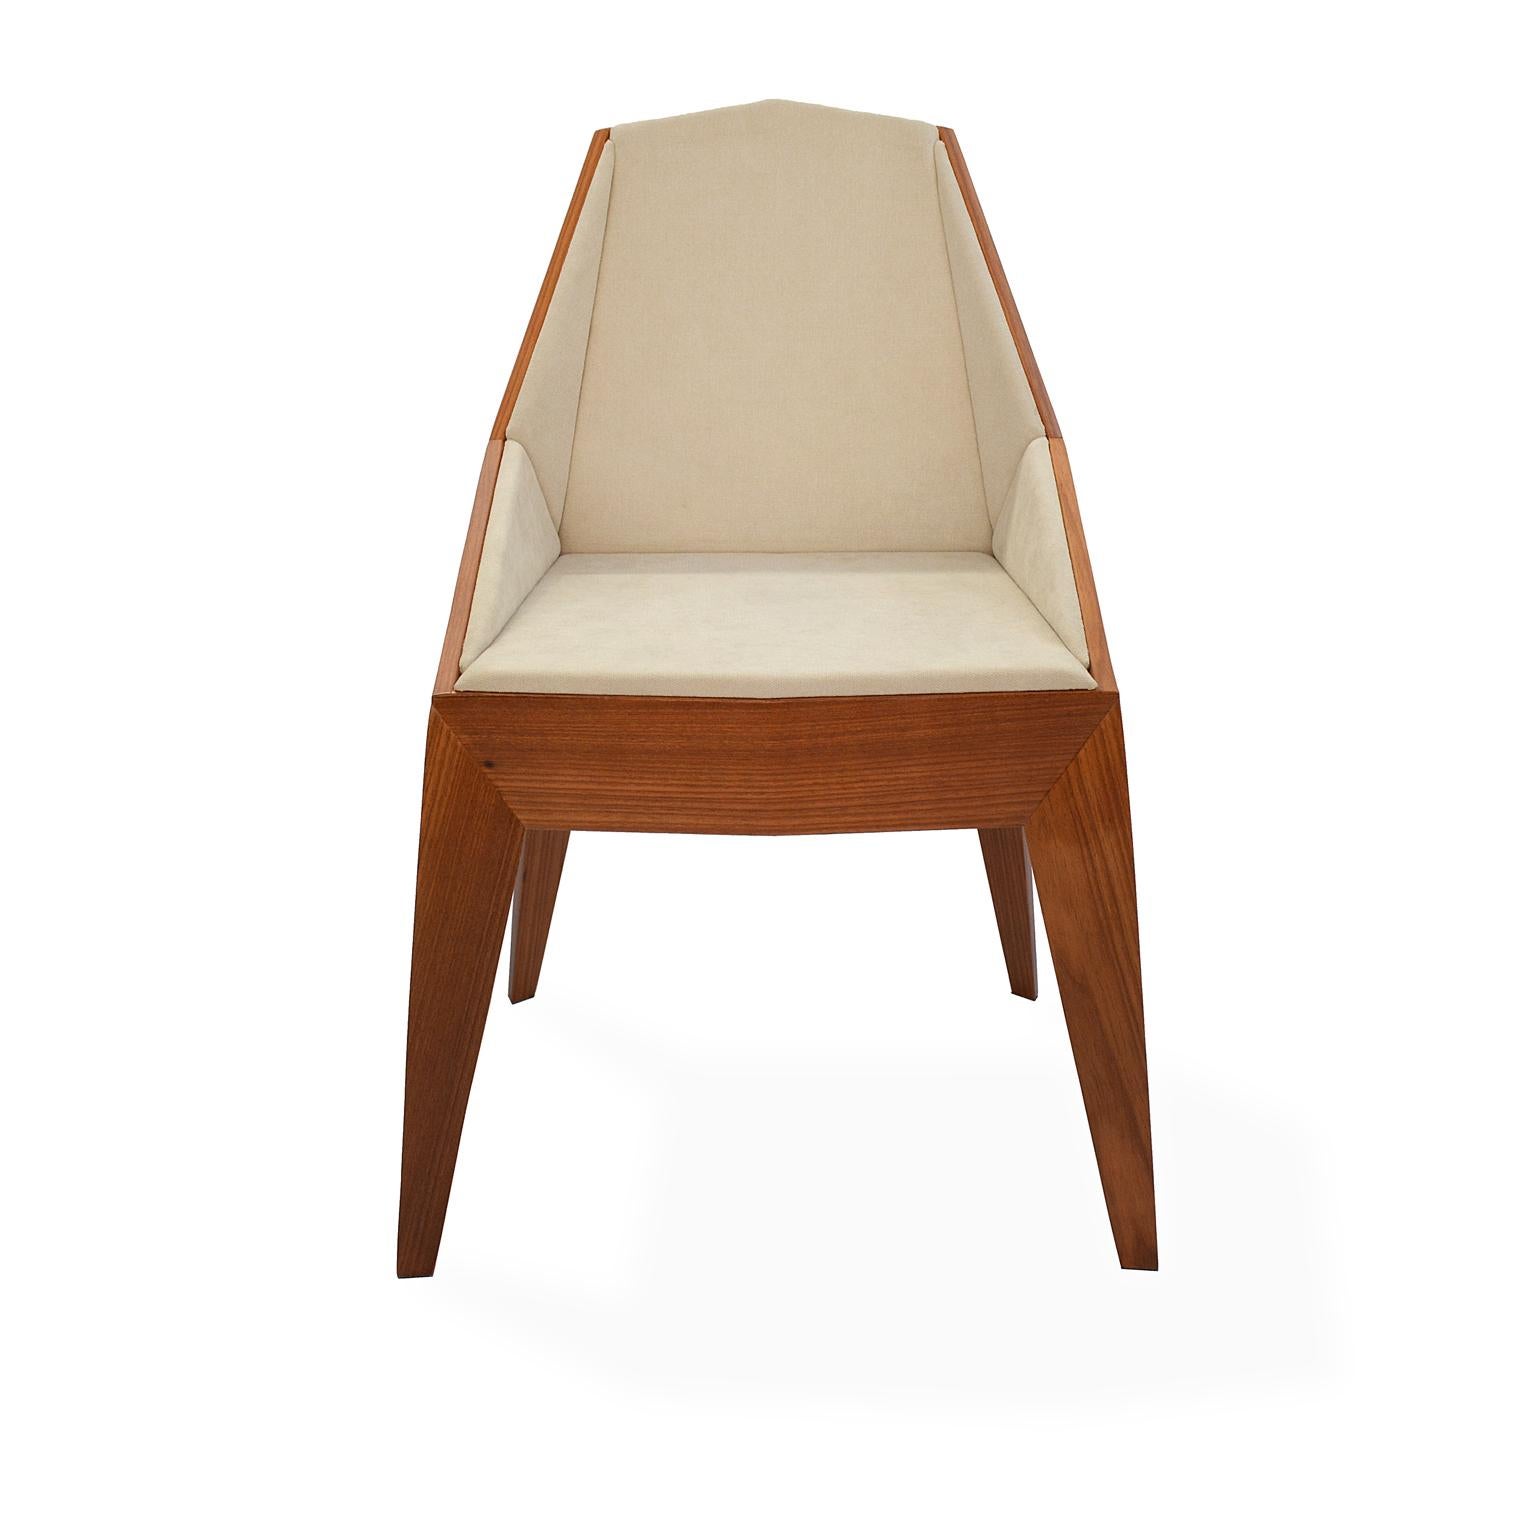 The contemporary Triarm chair has its entire shape based on triangles and facets, all with straight lines.
It is made entirely of plywood coated with Freijó veneer and finished with PU wood varnish.

The seat and backrest receives a thin layer of